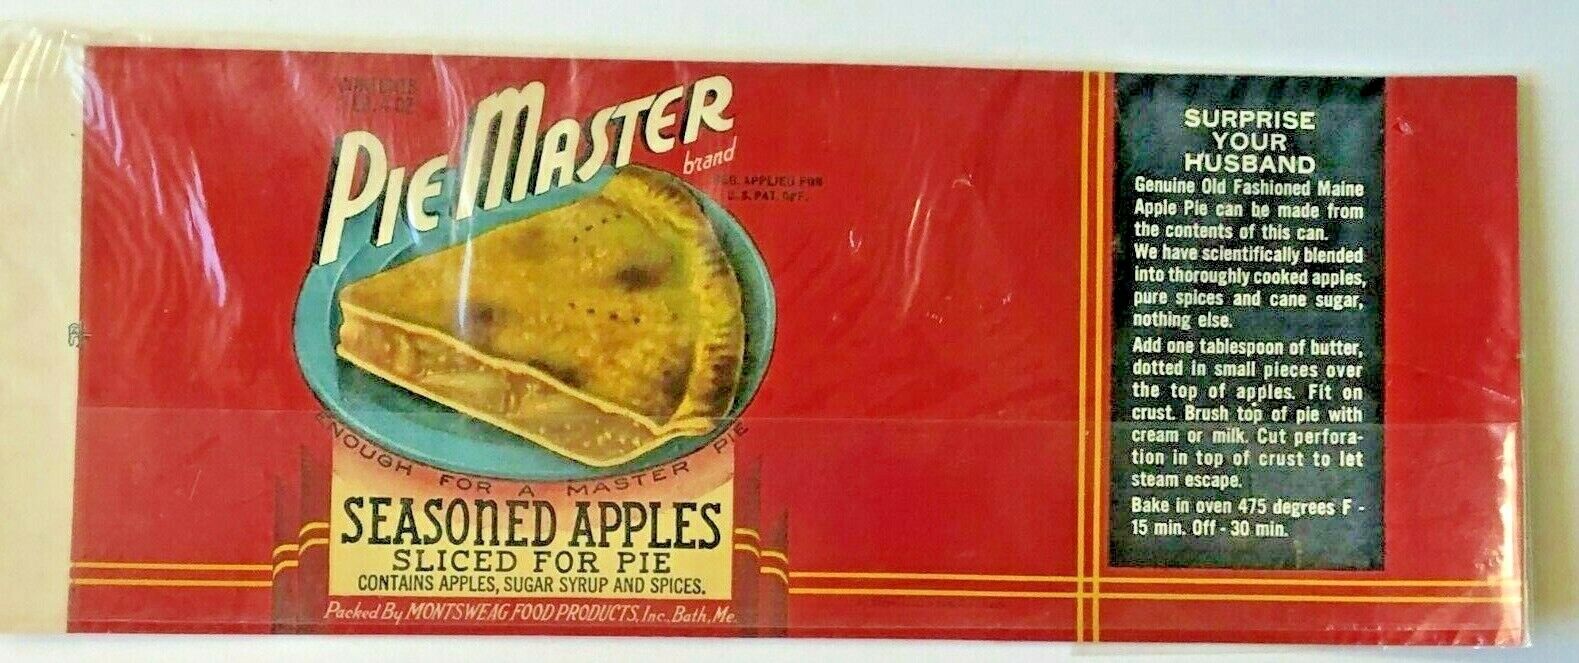 Antique New Old Stock Can Label Pie Master Seasoned Apples Bath Maine 